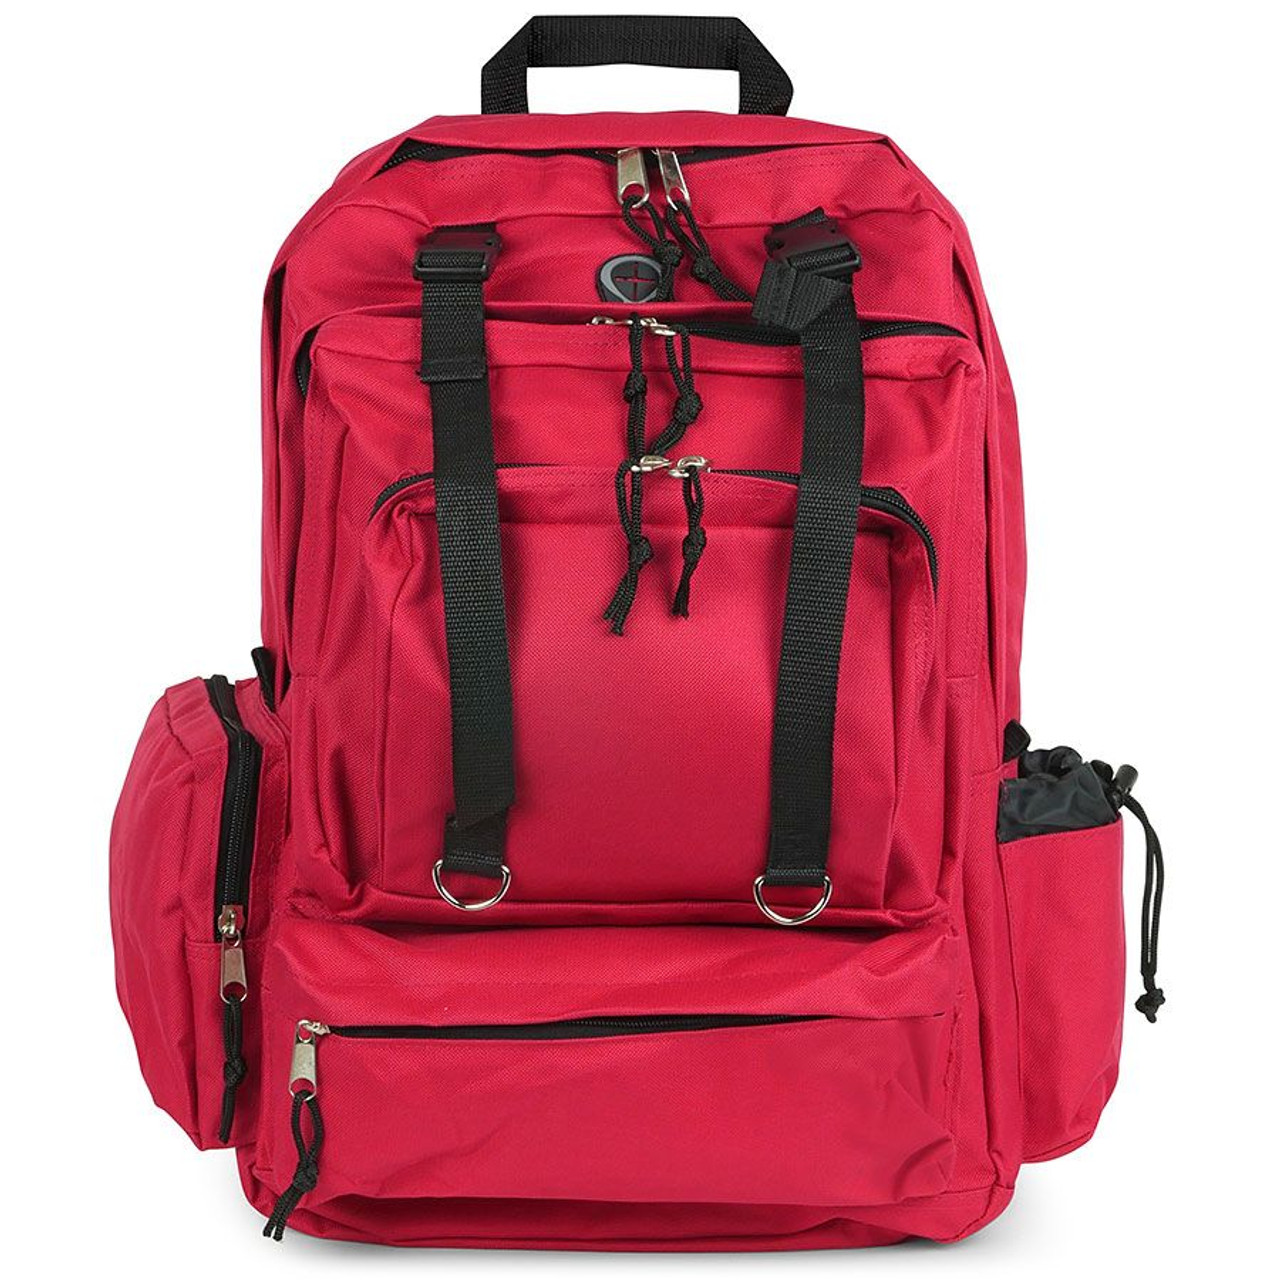 Deluxe Reponder Red Backpack - Emergency Survival Medical Response - Gear  Bag - Nylon - EMT Bags, Backpacks and First Aid Kit Containers | Wanderrucksäcke